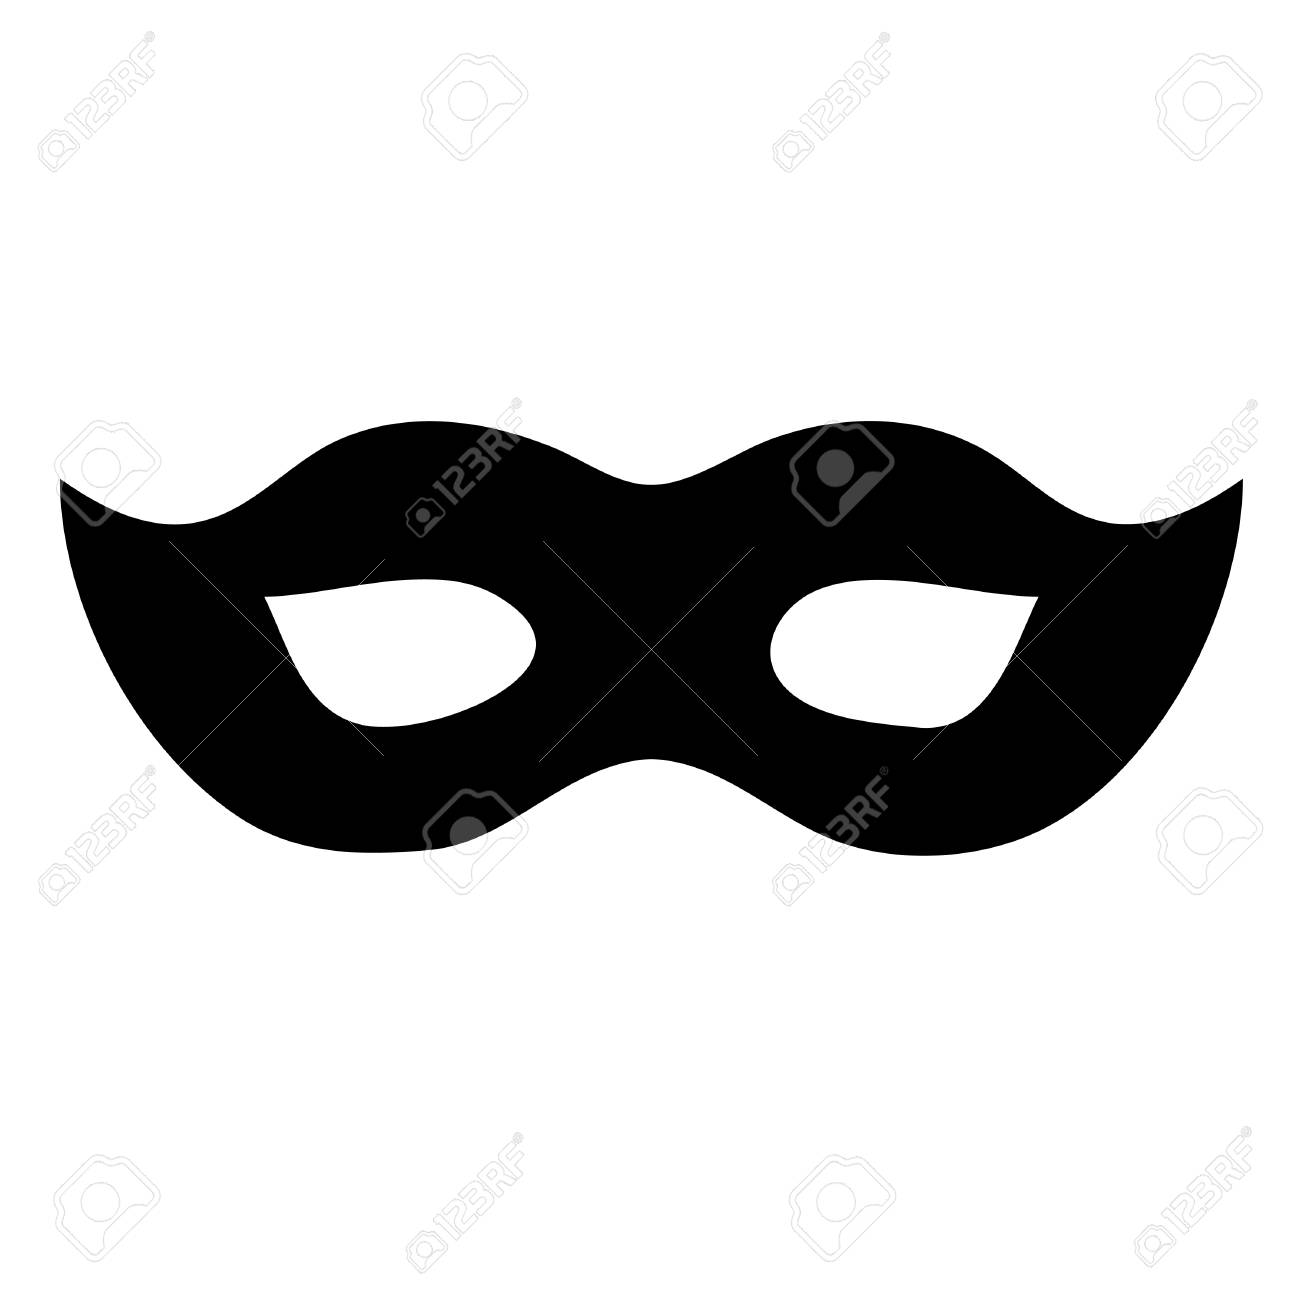 A black and white silhouette of a masquerade mask.